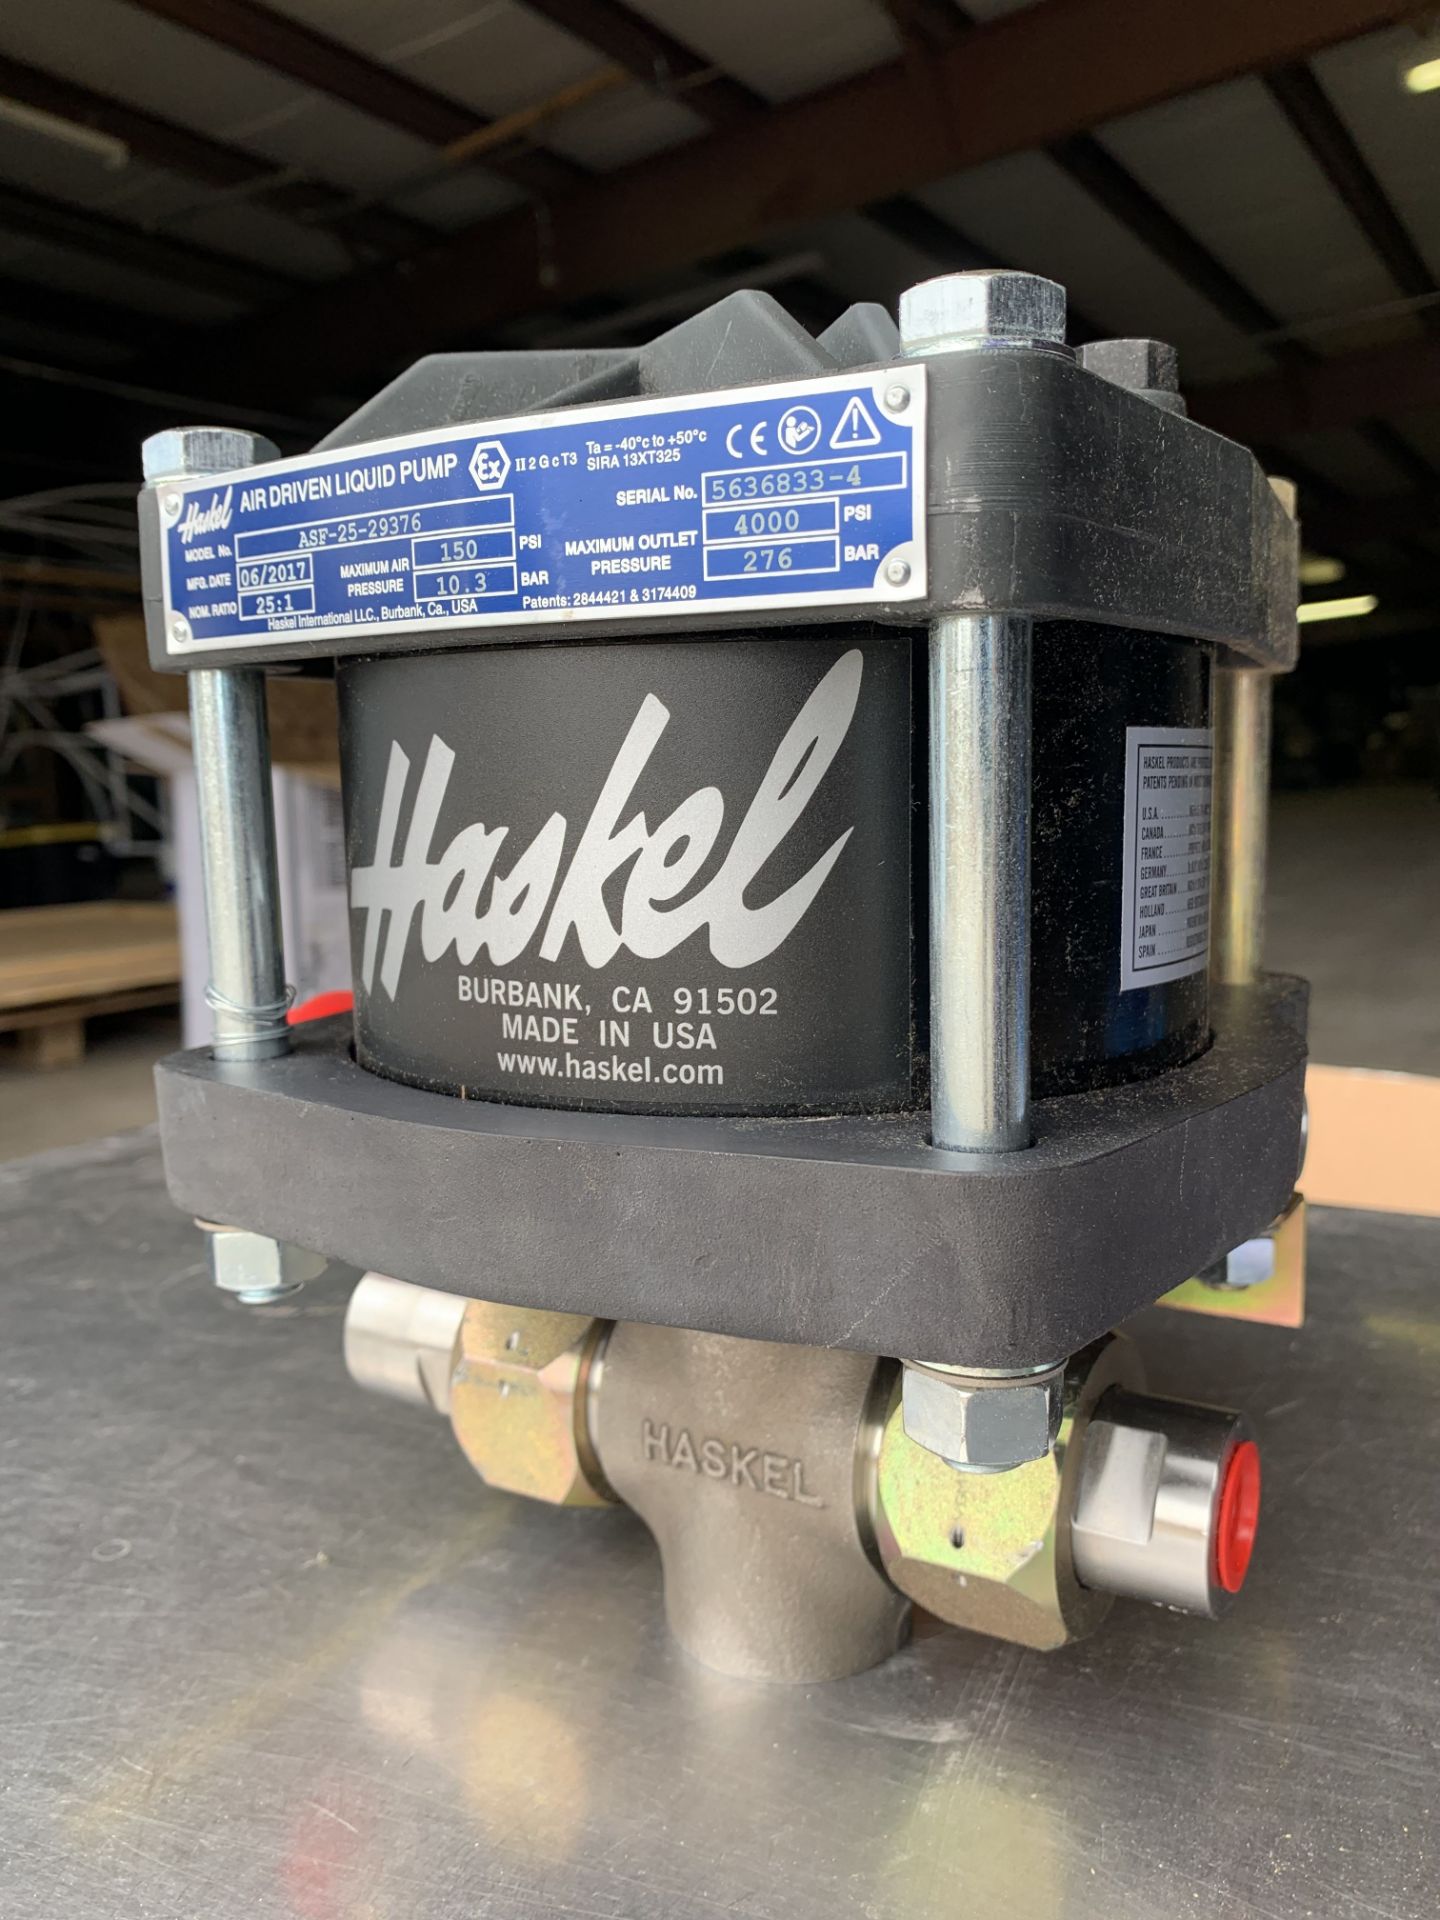 Haskel ASF-25 Air Driven Liquid Diaphram Pump. New in box, never used. ~ Location: Trindad, CO, US ~